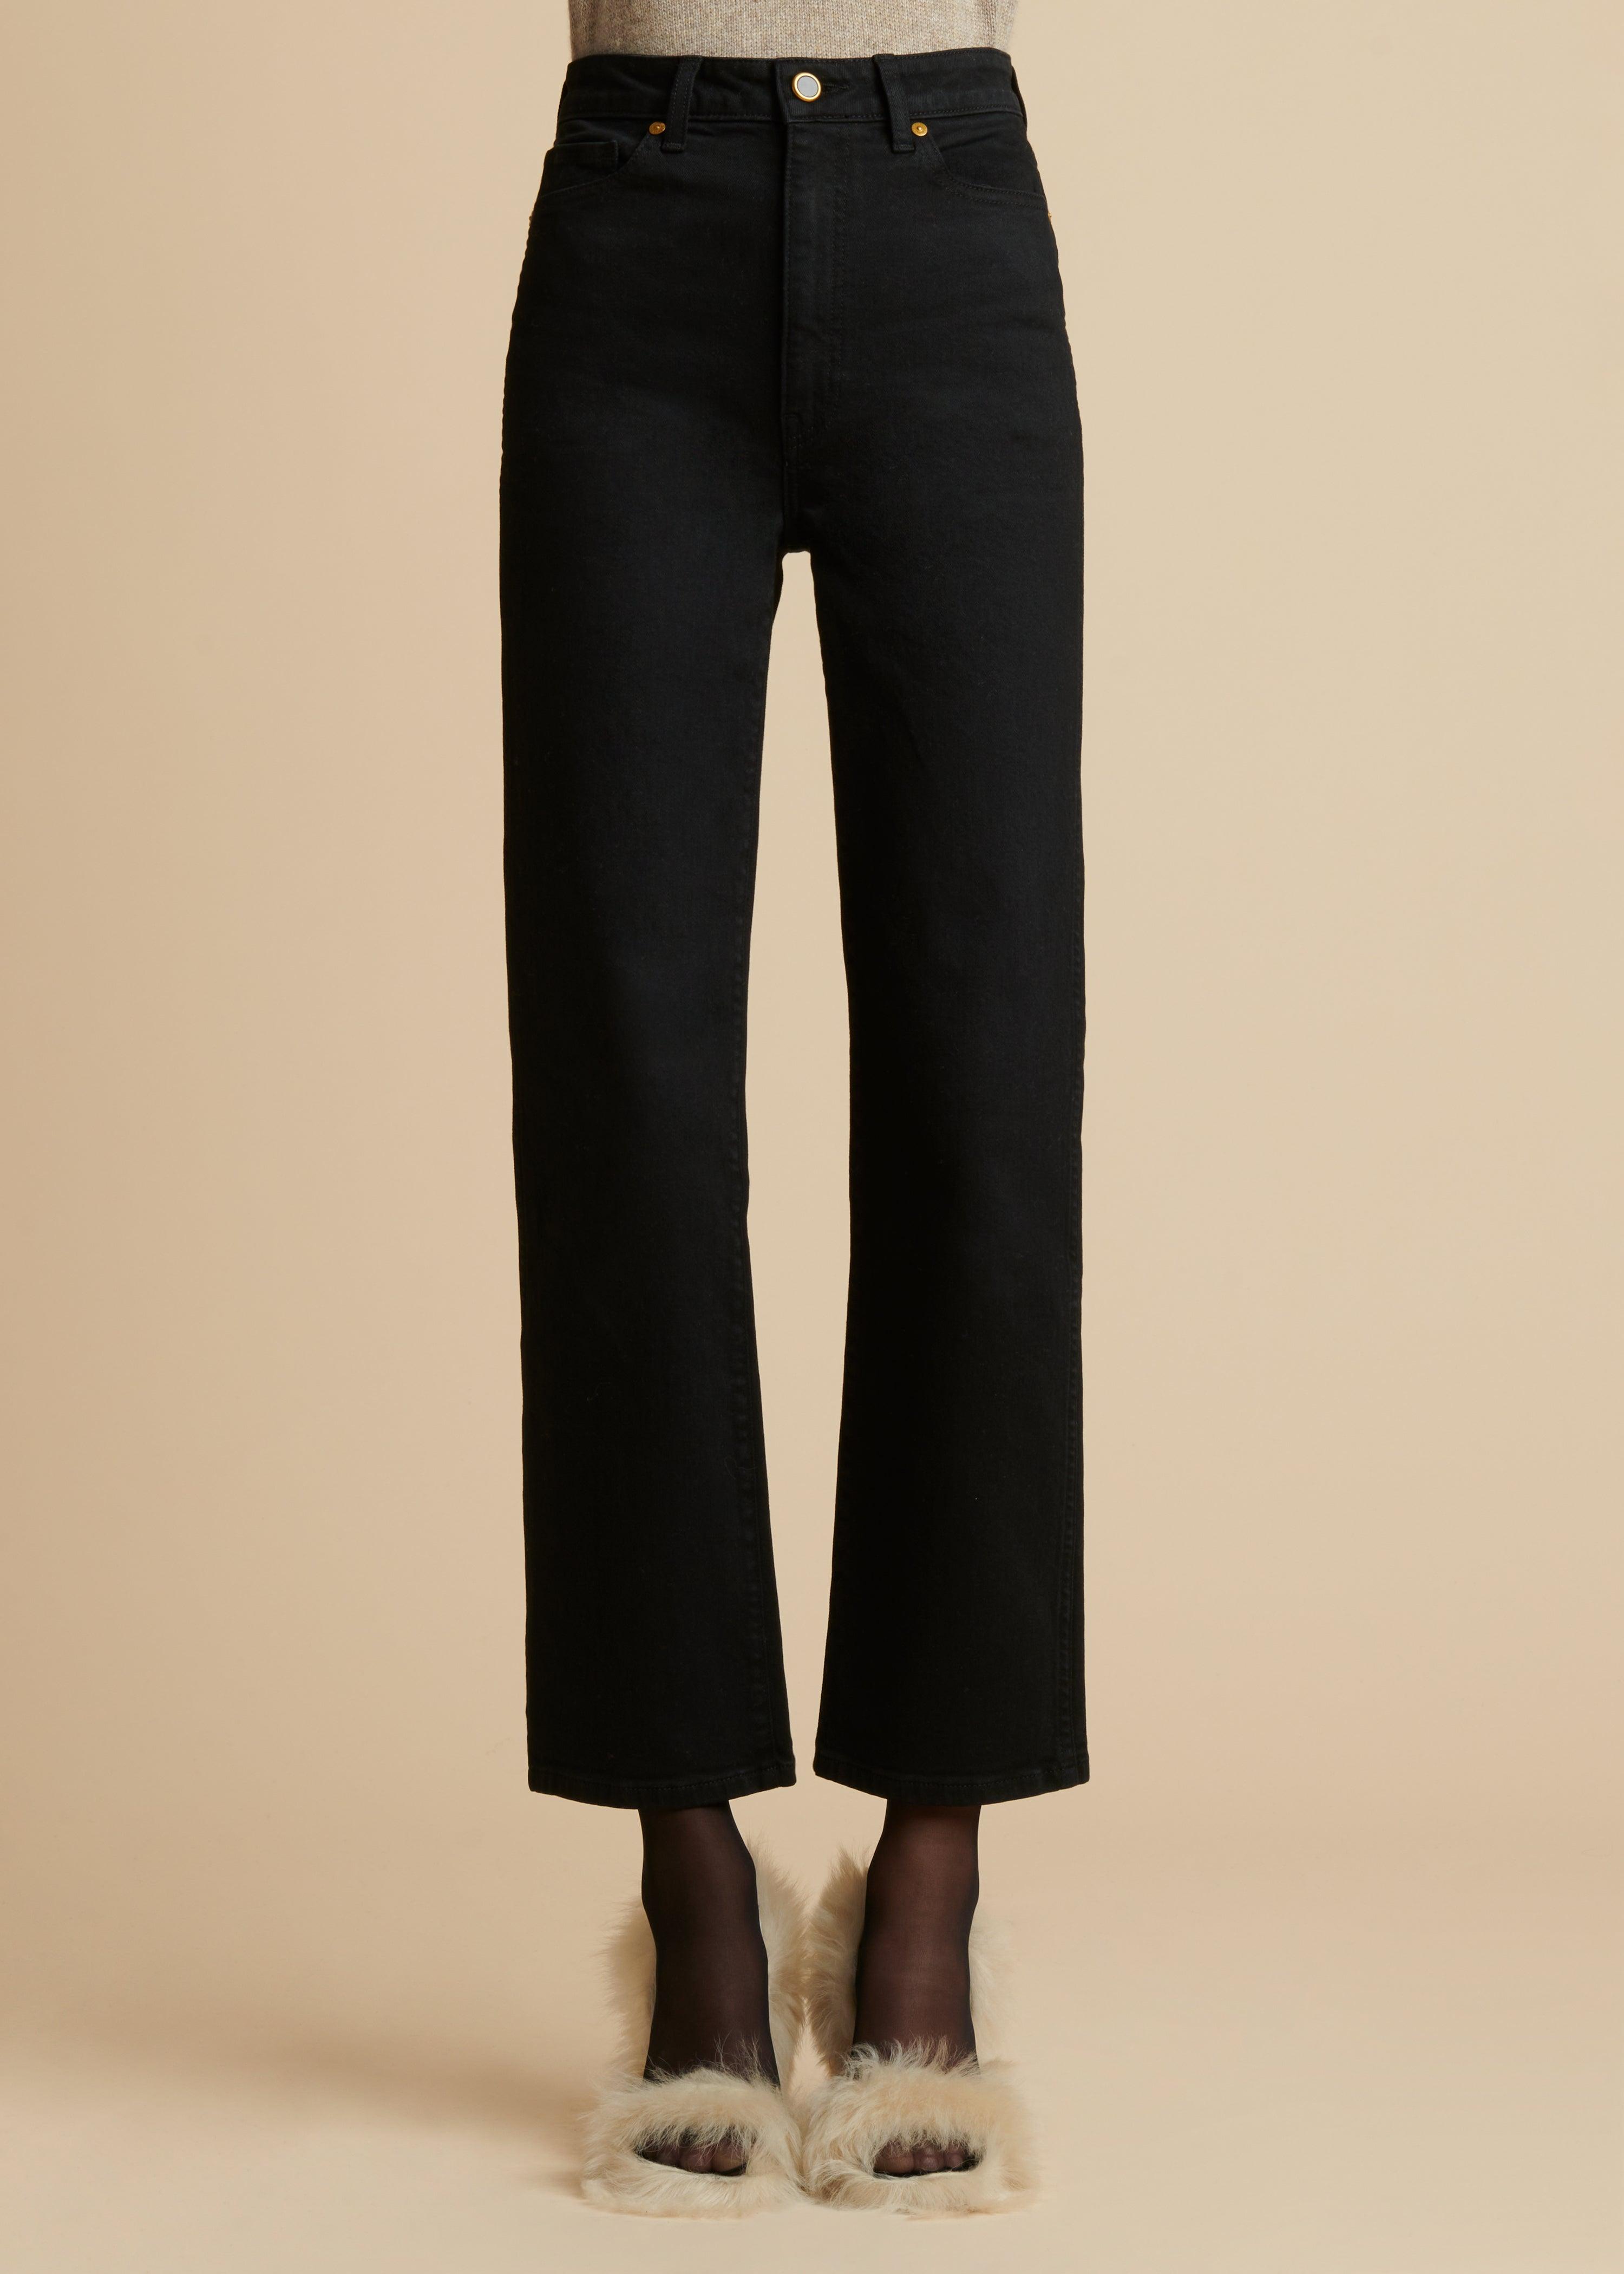 The Abigail Stretch Jean in Wilcox - The Iconic Issue